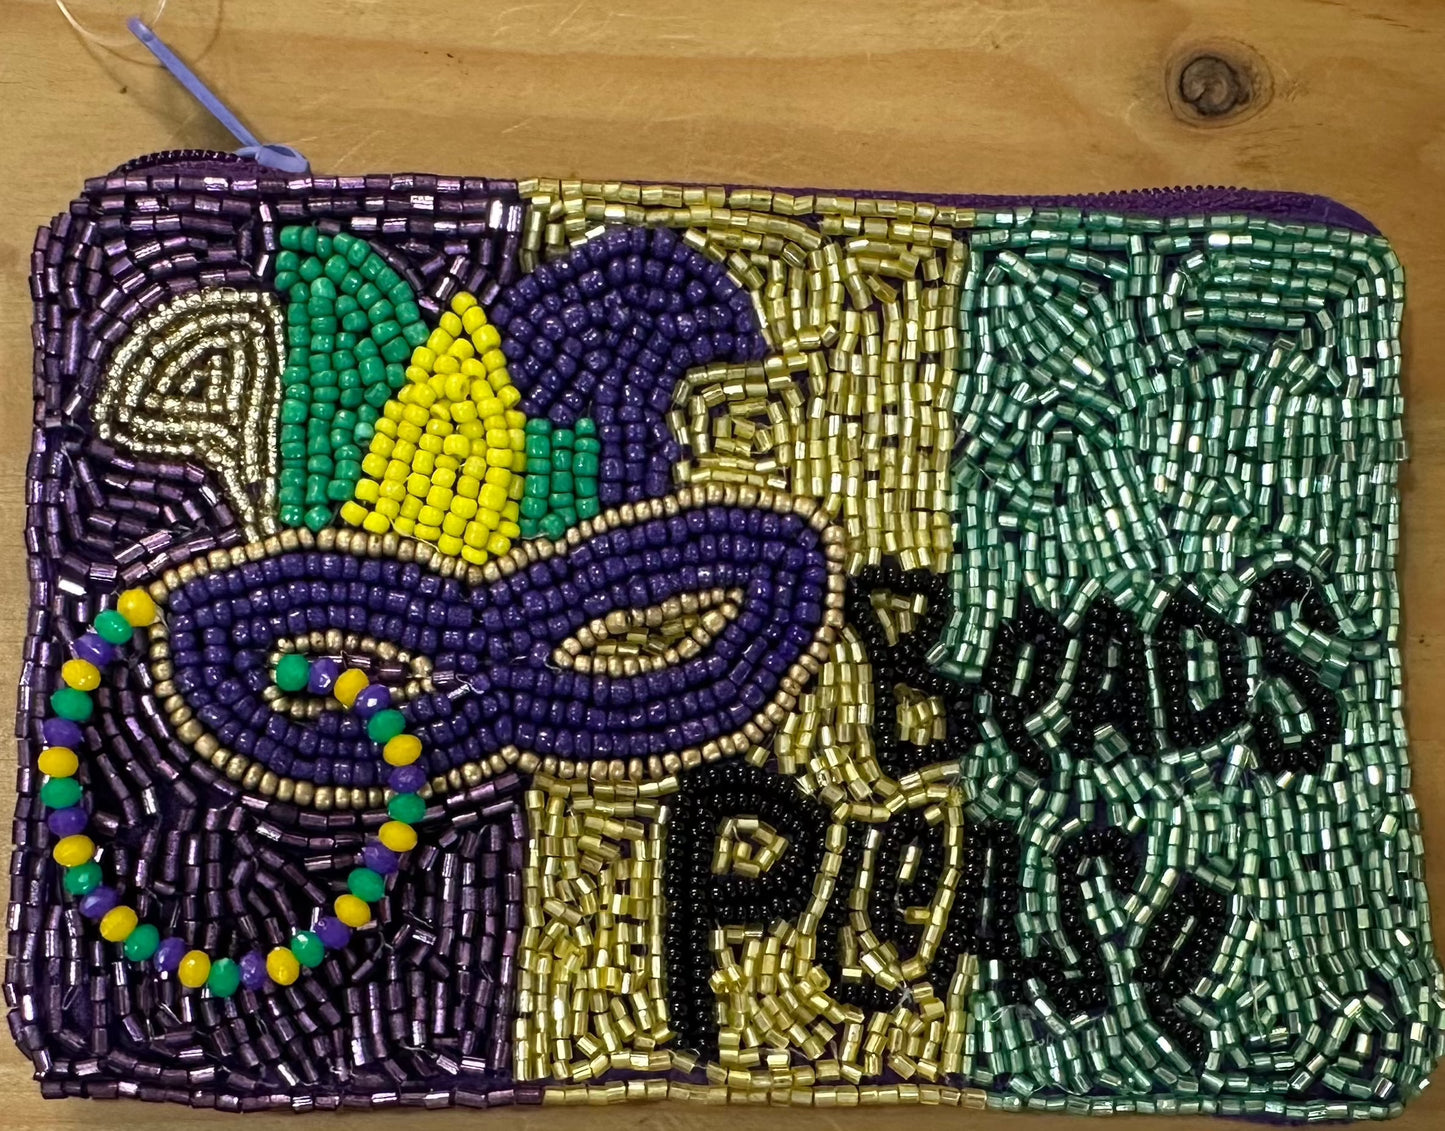 A Beads Please Beaded Coin Purse with a mardi gras design on it by Chickie Collective.